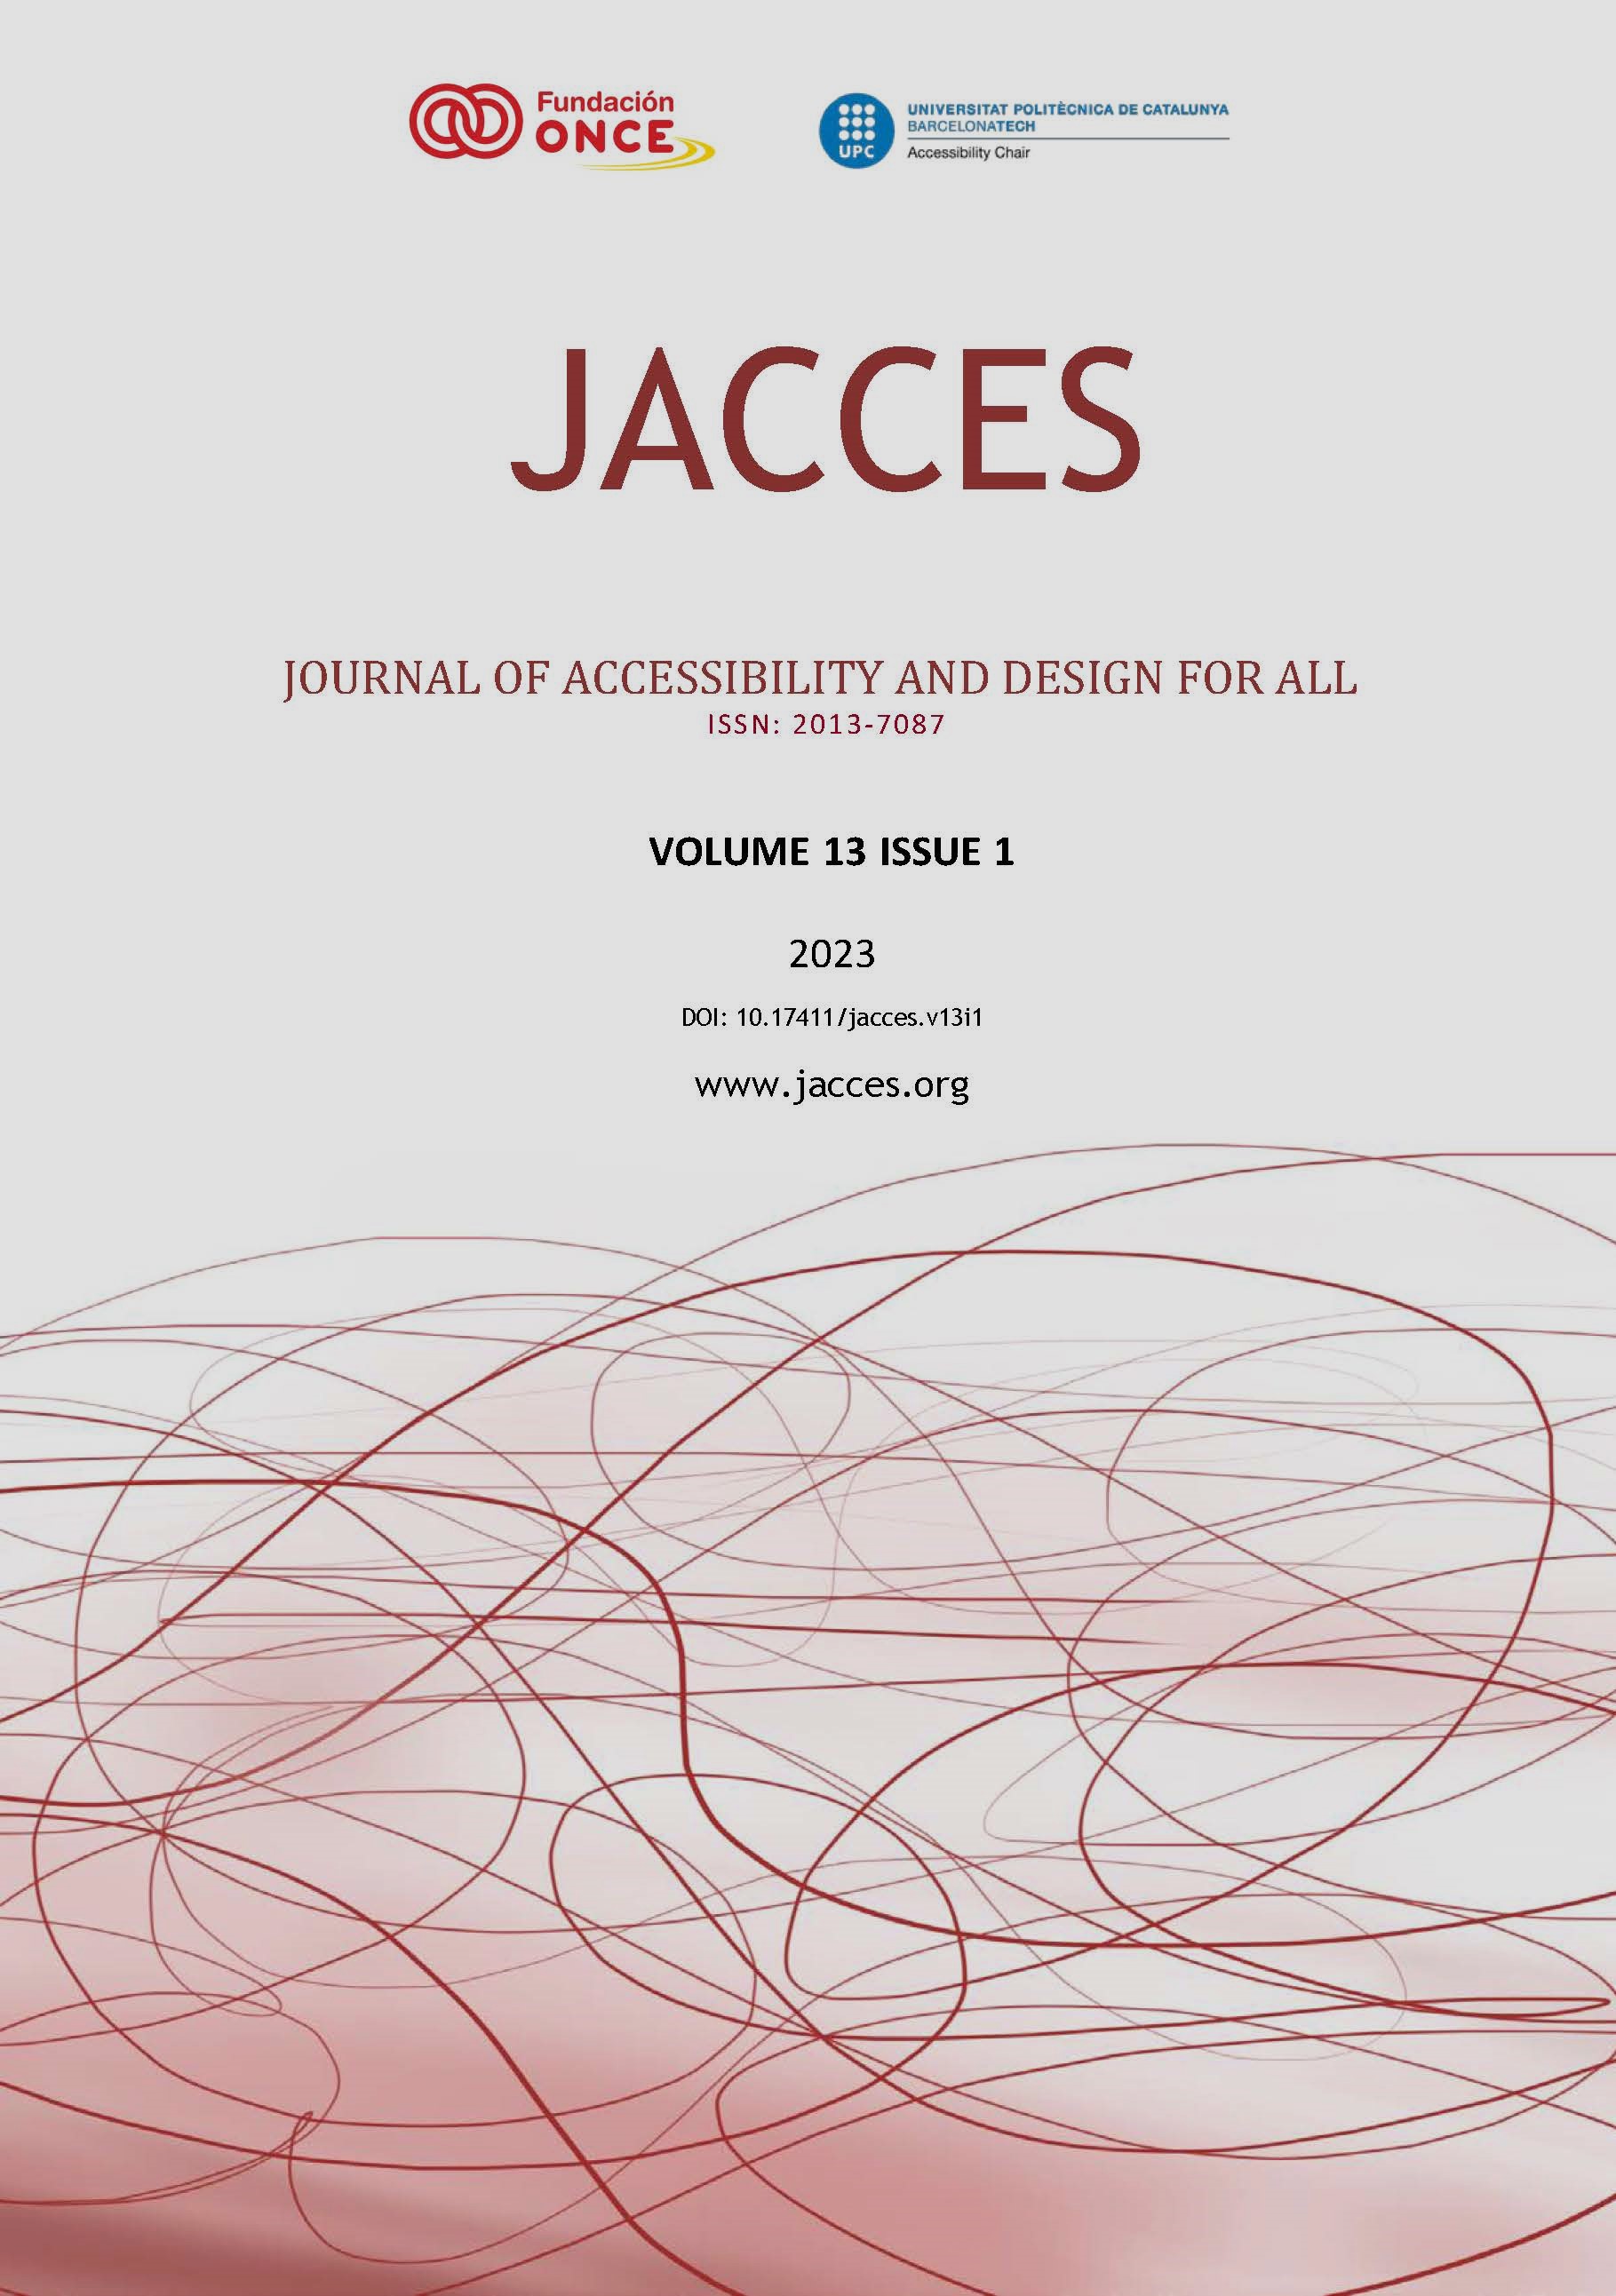 Cover of Journal of Accessibility and Design for All Vol. 13 No. 1 (2023)